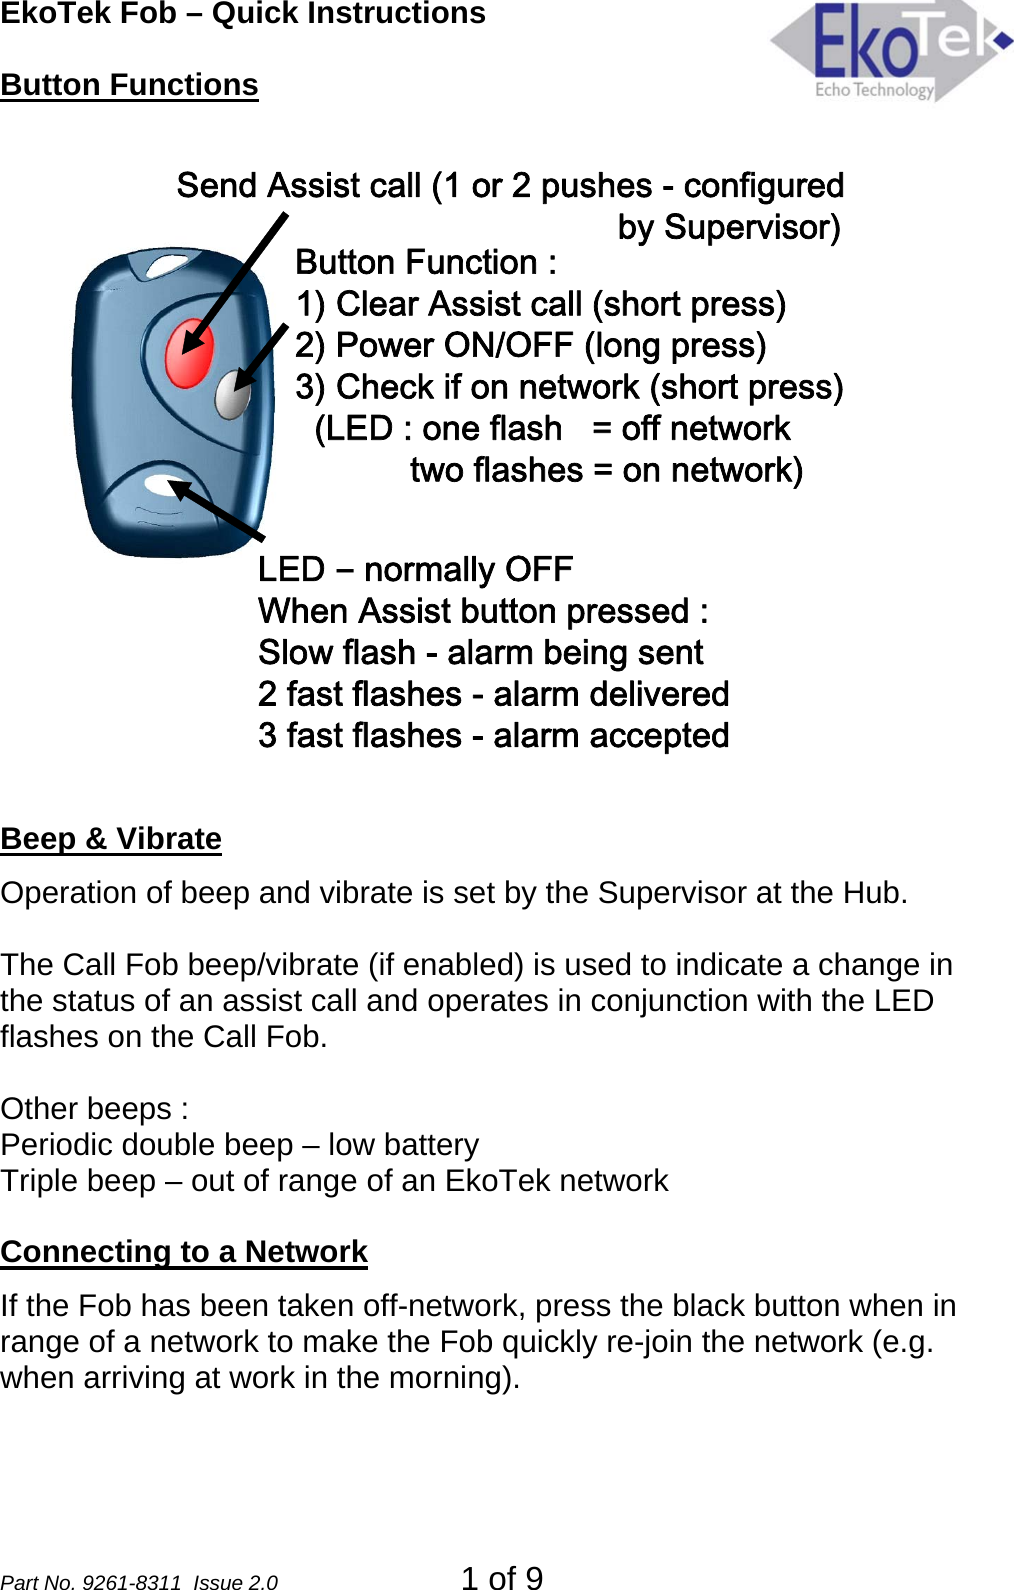 EkoTek Fob – Quick Instructions Button Functions Send Assist call (1 or 2 pushes - configuredby Supervisor)Button Function :1) Clear Assist call (short press)2) Power ON/OFF (long press)3) Check if on network (short press)(LED : one flash   = off networktwo flashes = on network)LED –normally OFFWhen Assist button pressed :Slow flash - alarm being sent2 fast flashes - alarm delivered3 fast flashes - alarm accepted  Beep &amp; Vibrate Operation of beep and vibrate is set by the Supervisor at the Hub.  The Call Fob beep/vibrate (if enabled) is used to indicate a change in the status of an assist call and operates in conjunction with the LED flashes on the Call Fob.  Other beeps : Periodic double beep – low battery Triple beep – out of range of an EkoTek network  Connecting to a Network If the Fob has been taken off-network, press the black button when in range of a network to make the Fob quickly re-join the network (e.g. when arriving at work in the morning). Part No. 9261-8311  Issue 2.0  1 of 9 